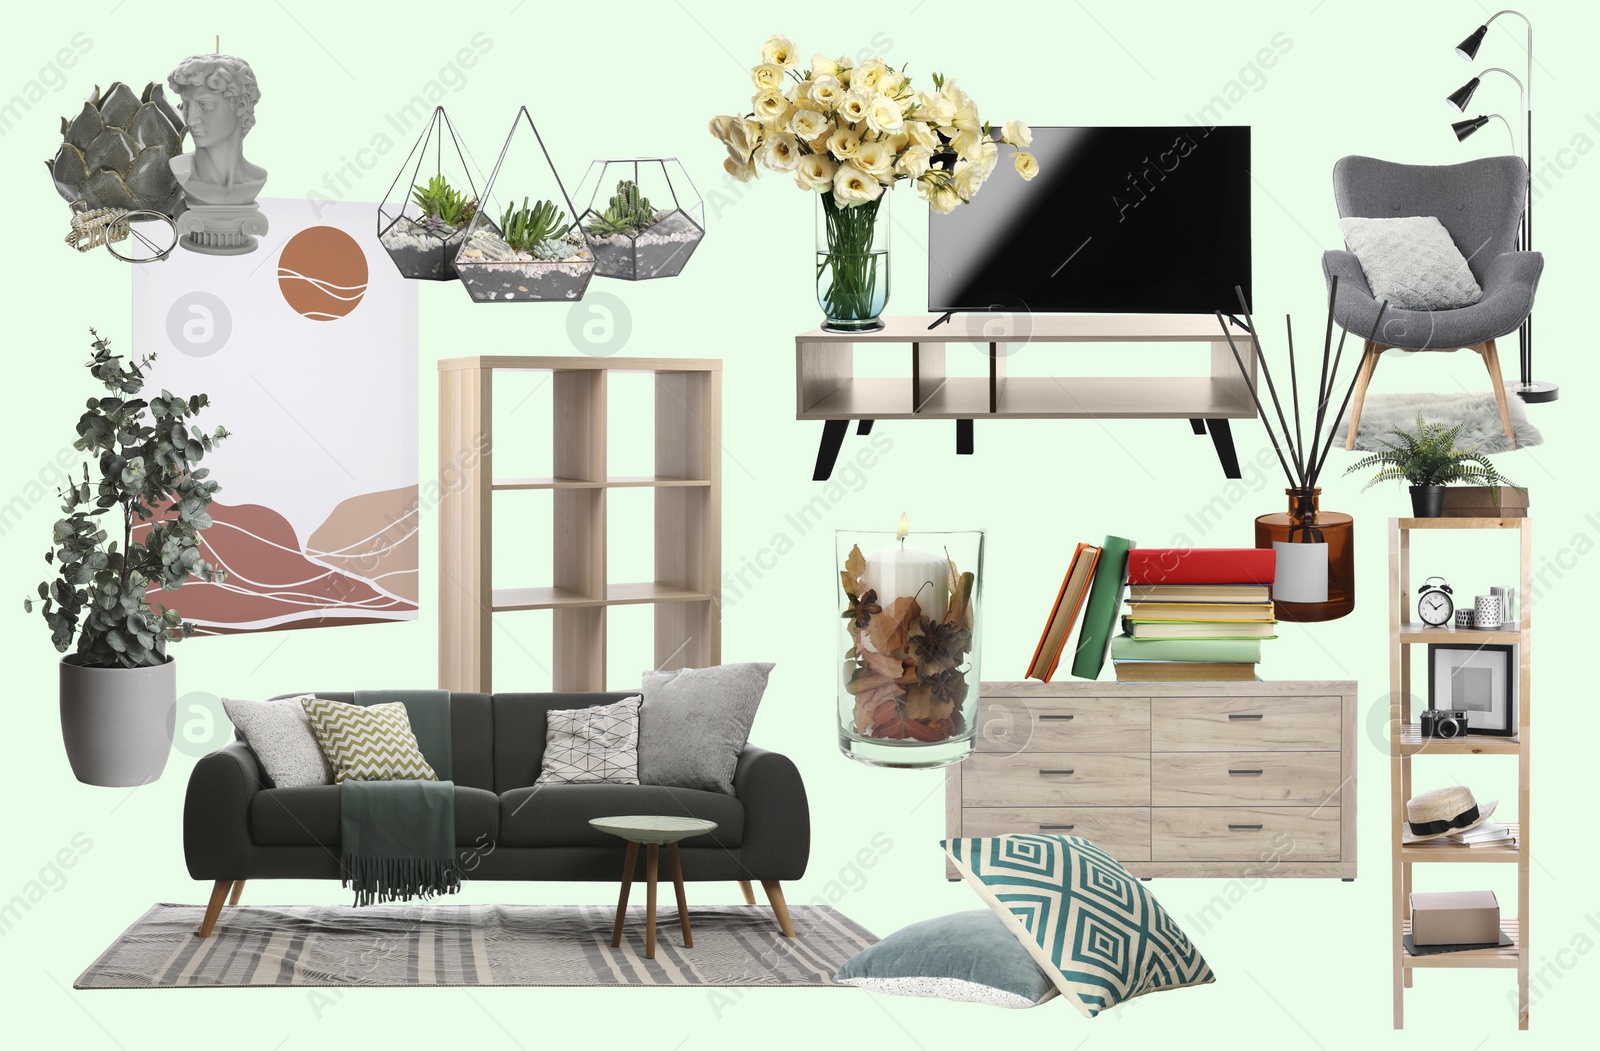 Image of Living room interior design. Collage with different combinable furniture and decorative elements on pale light green background